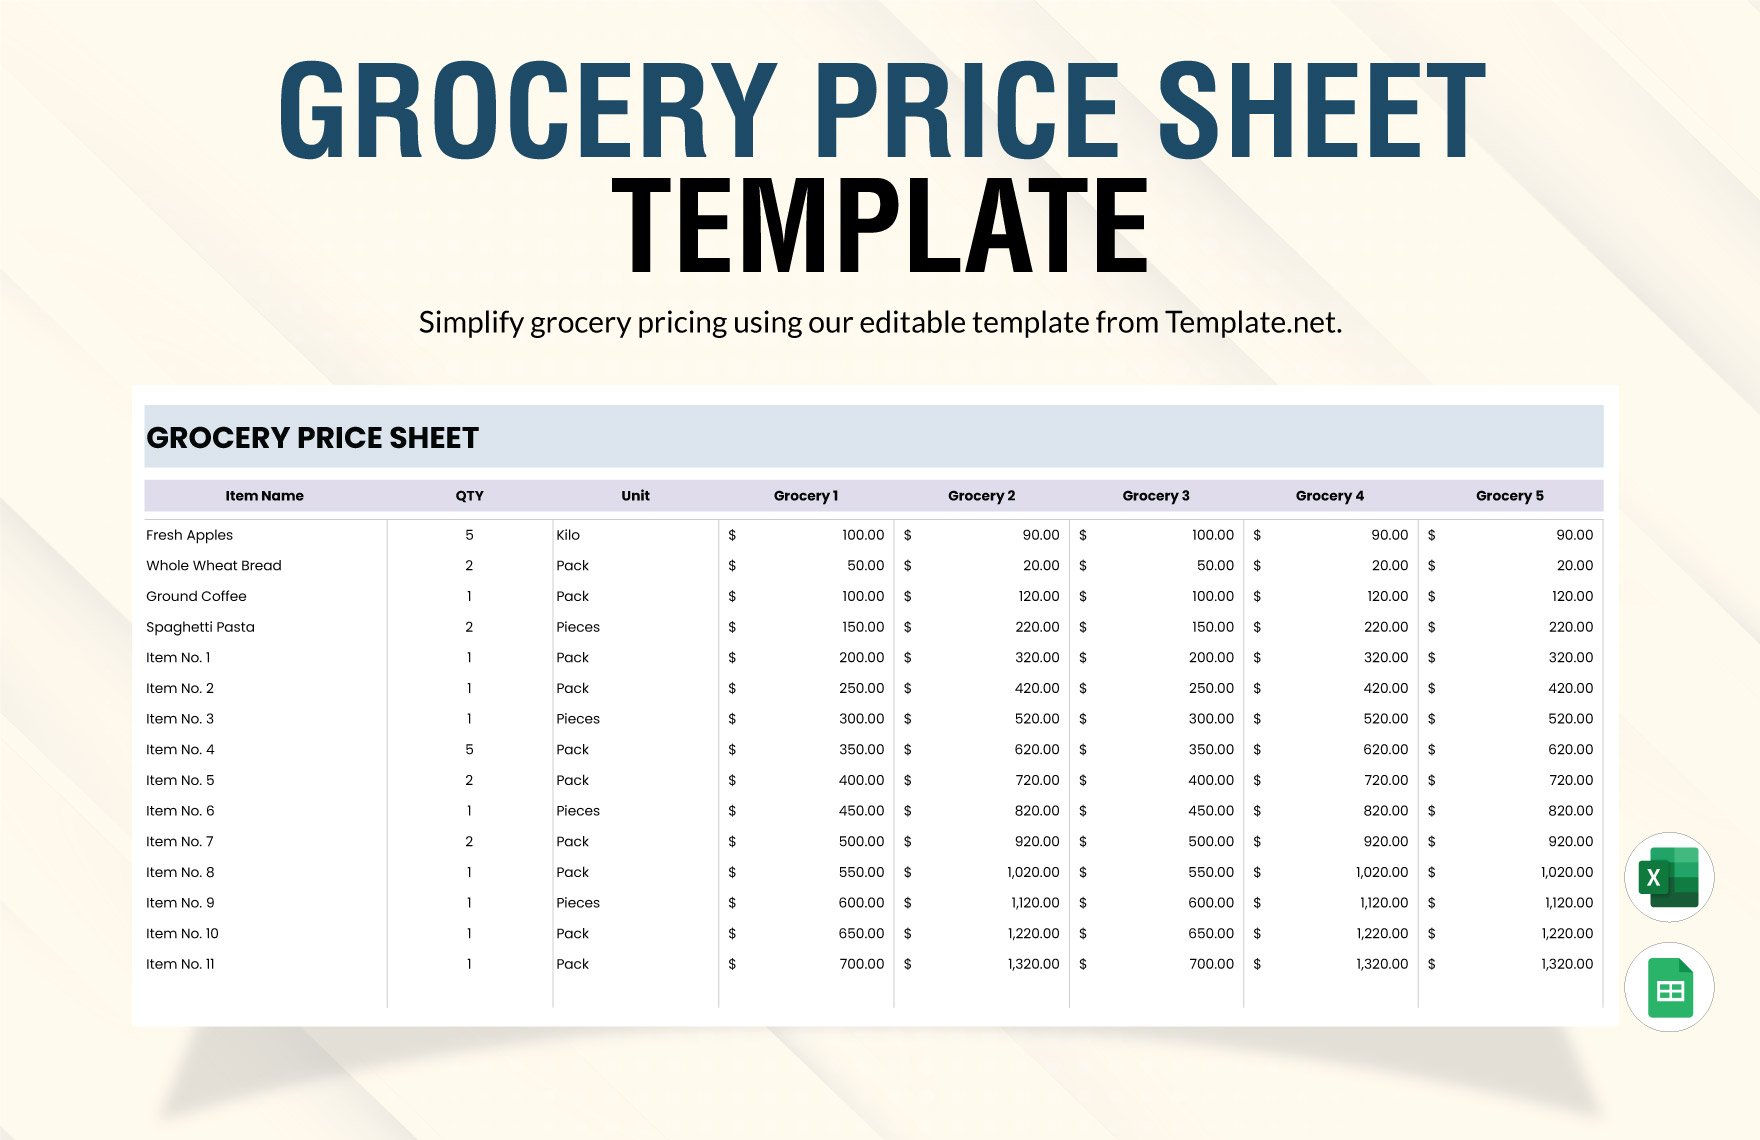 Grocery Price Sheet Template in Excel, Google Sheets